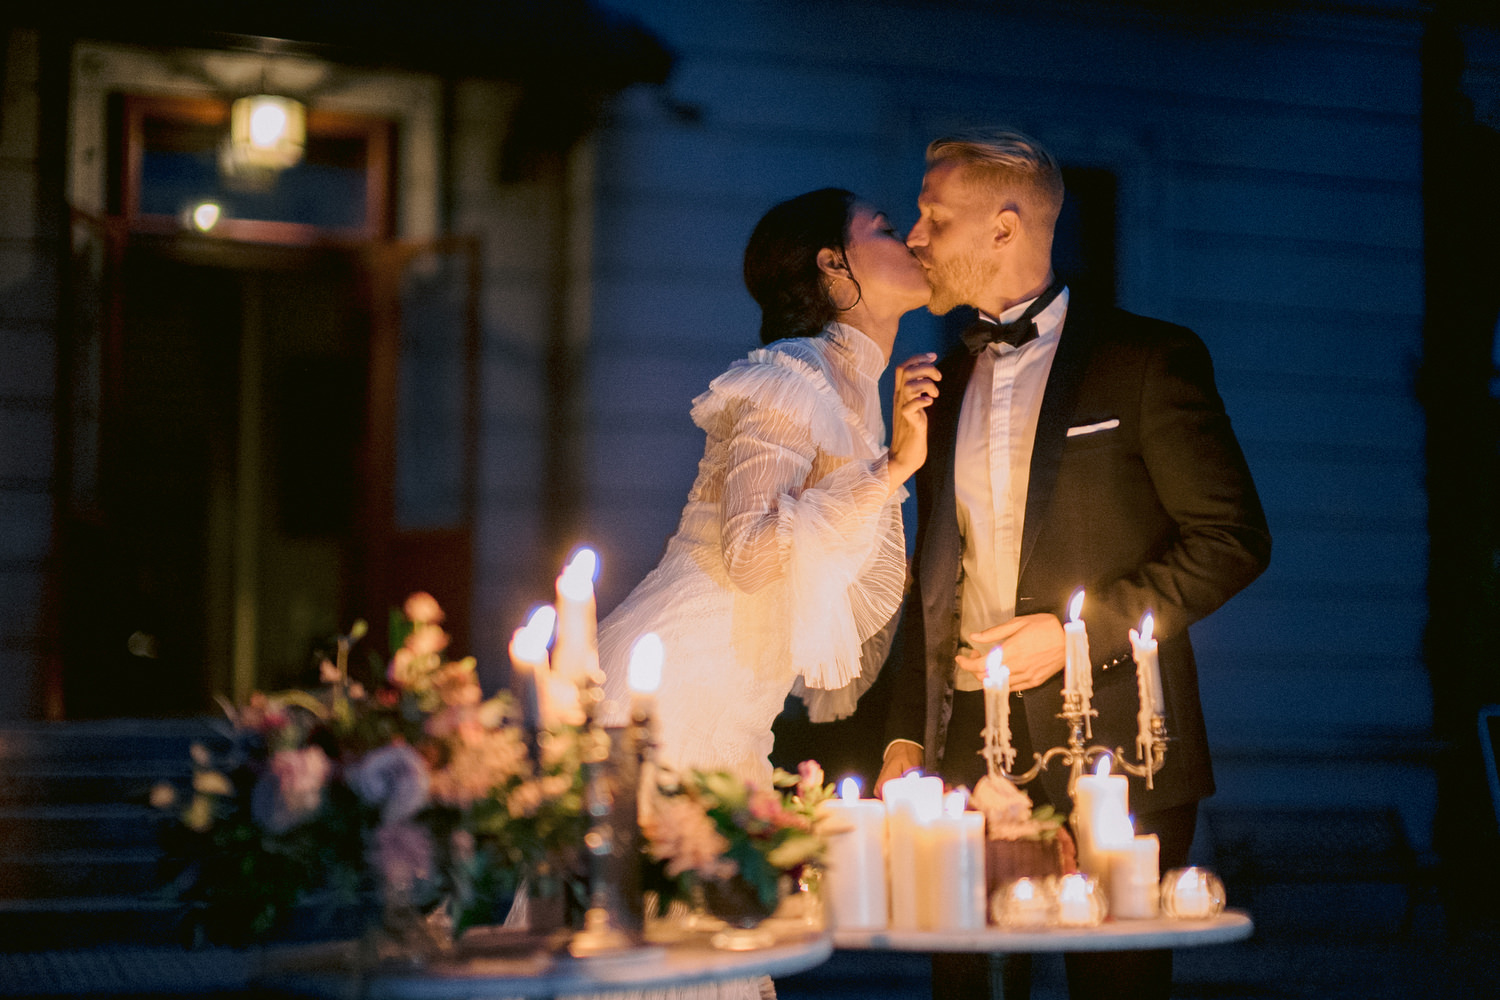 stunning bride and groom share a kiss at their candlelit cake cutting ceremony, Italian destination elopement wedding Lake Como, Italy, fine art, documentary, photojournalistic, editorial wedding photography by Jenny fu